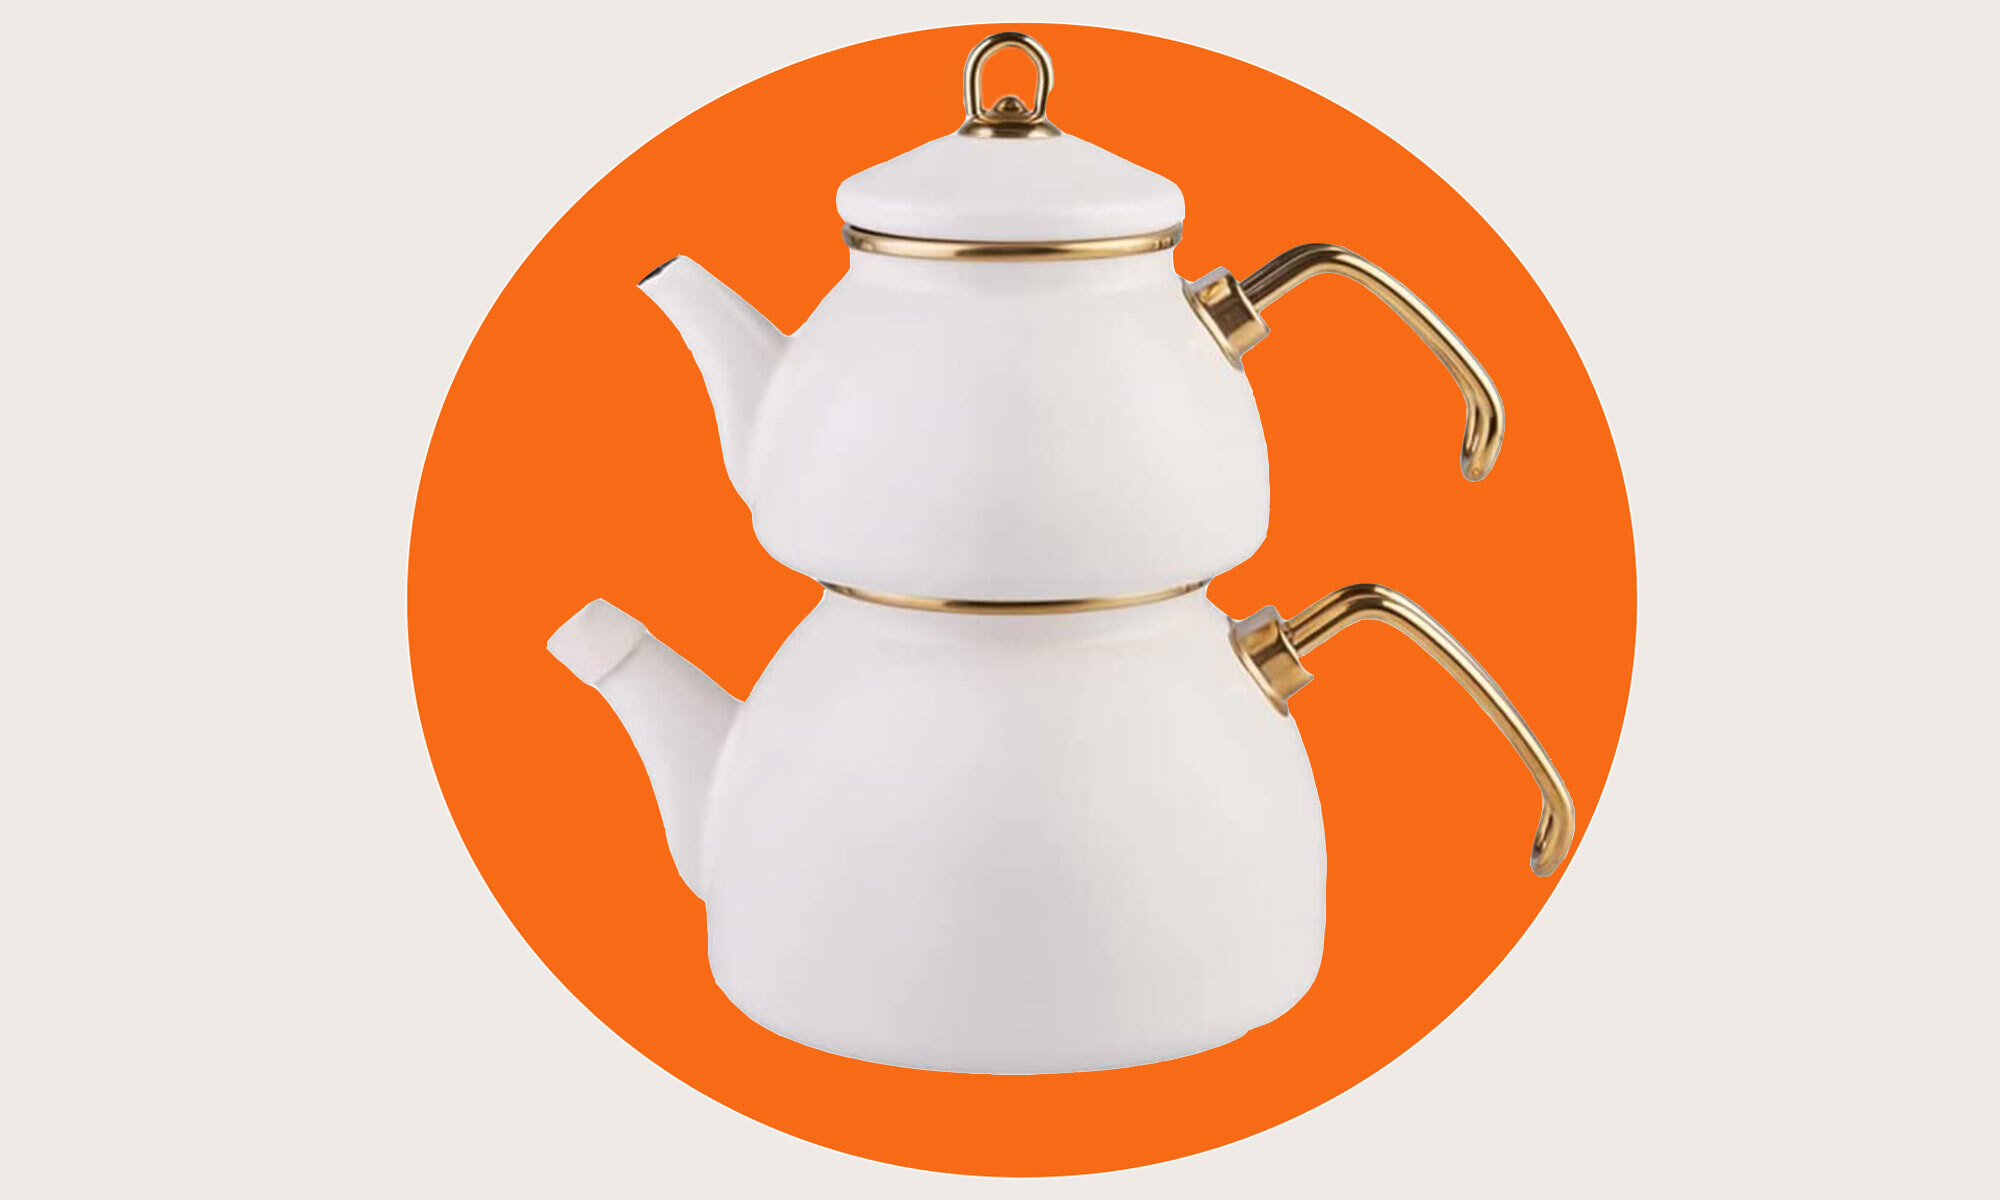 A porcelain double teapot with bronze handles and rims, against an abstract background 